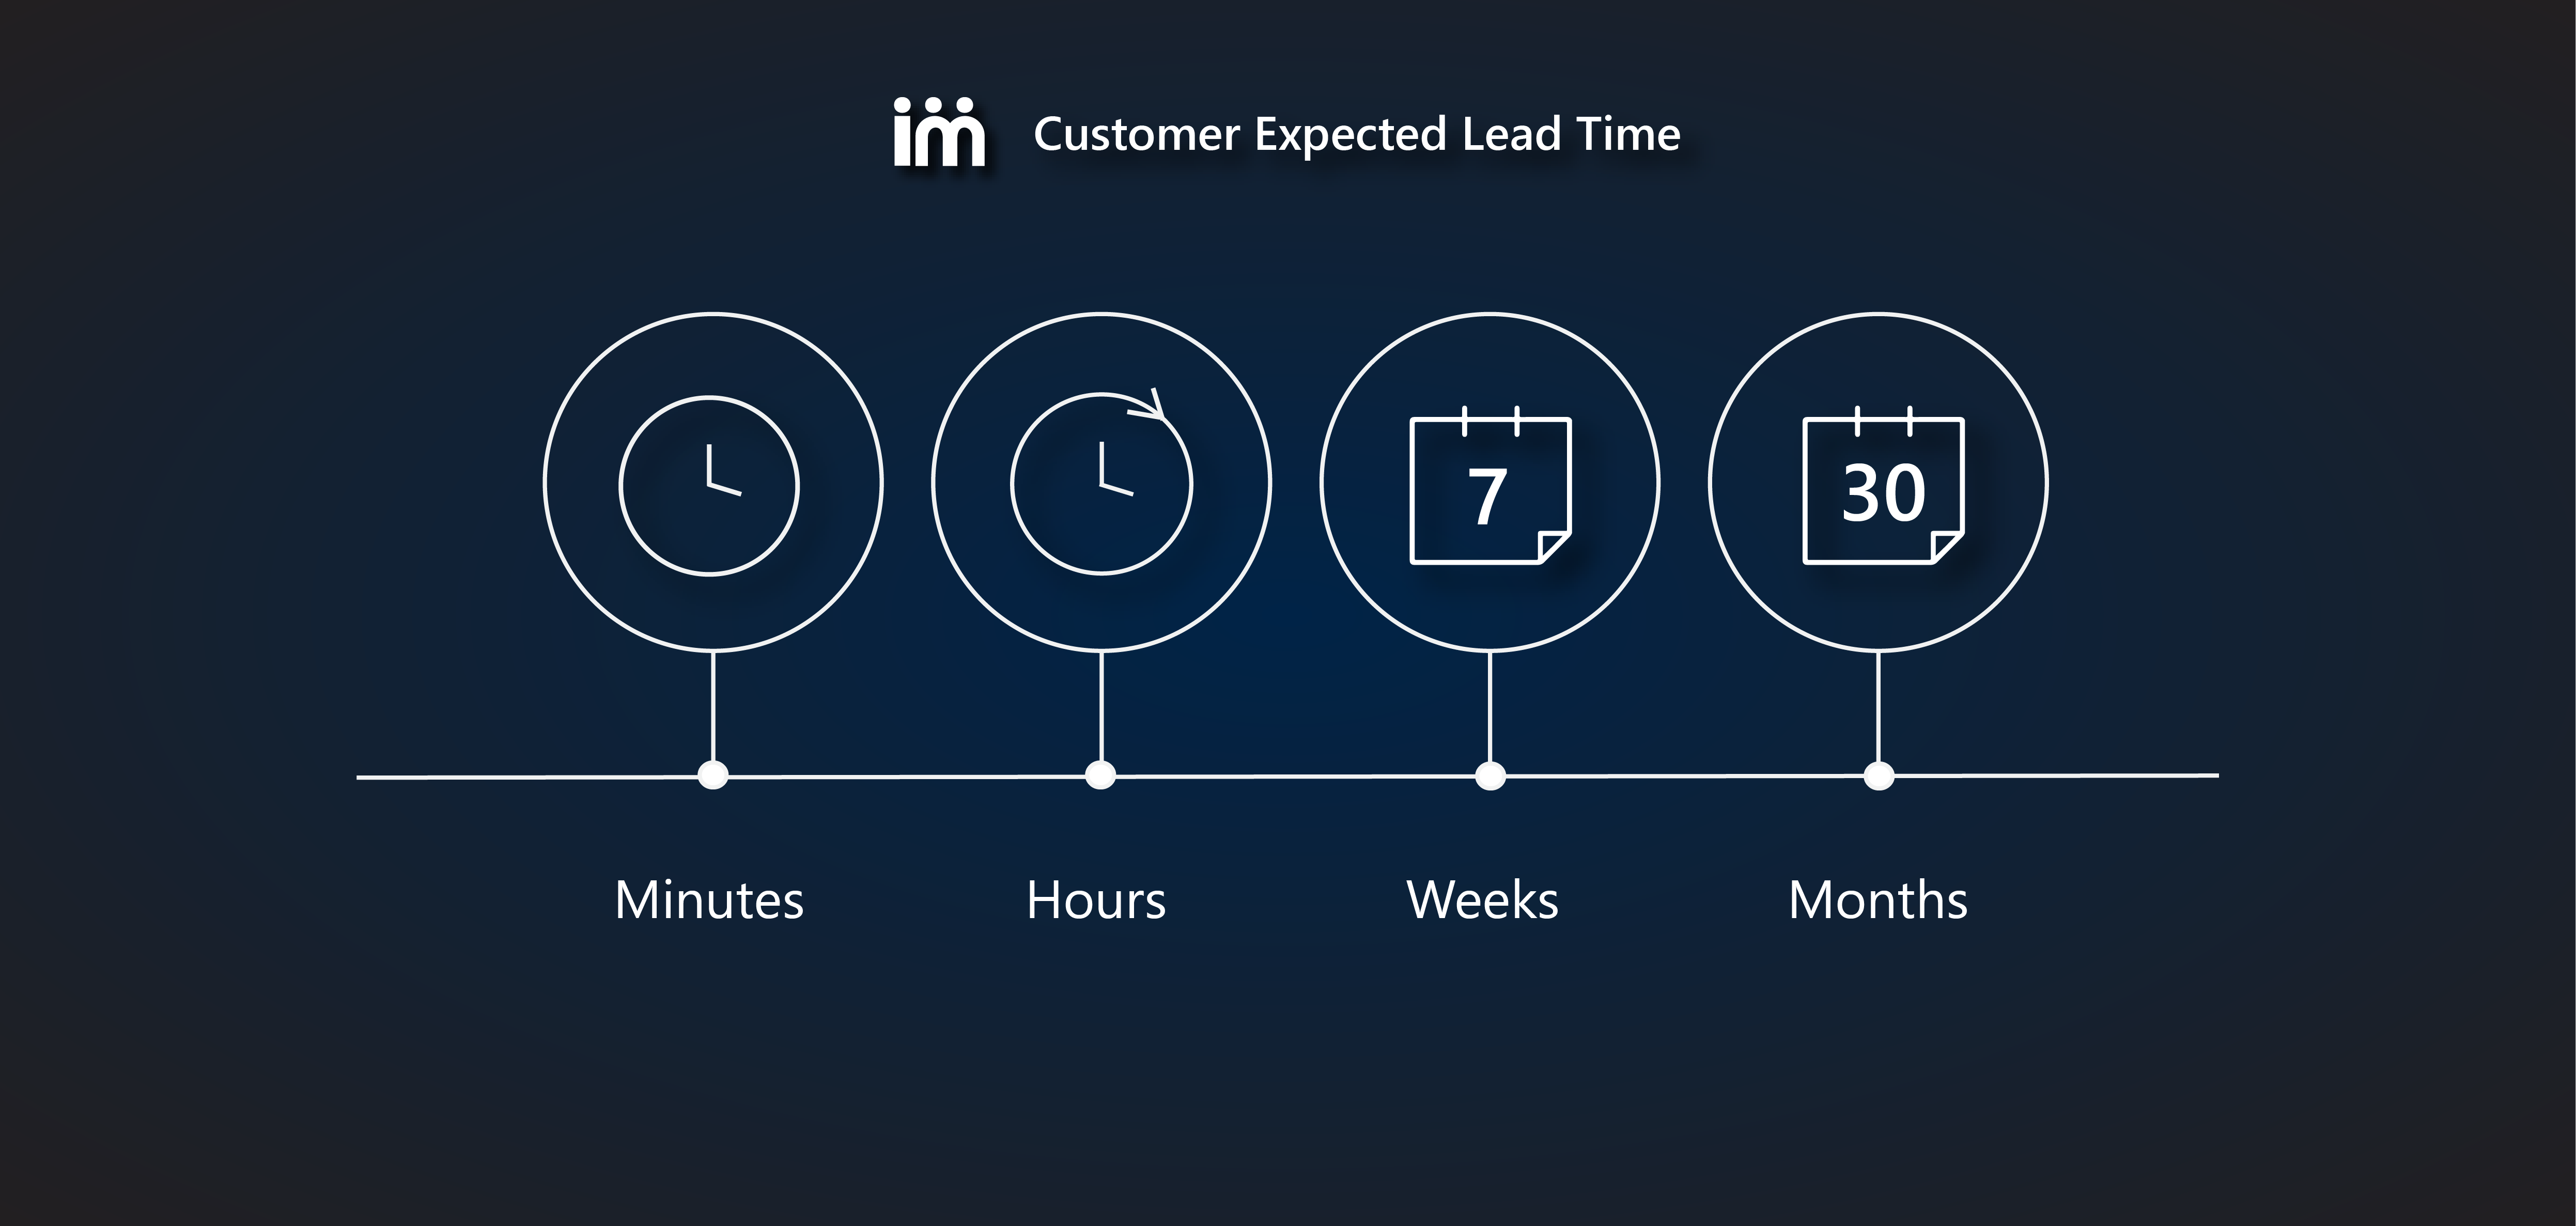 Customer Expected Lead Time